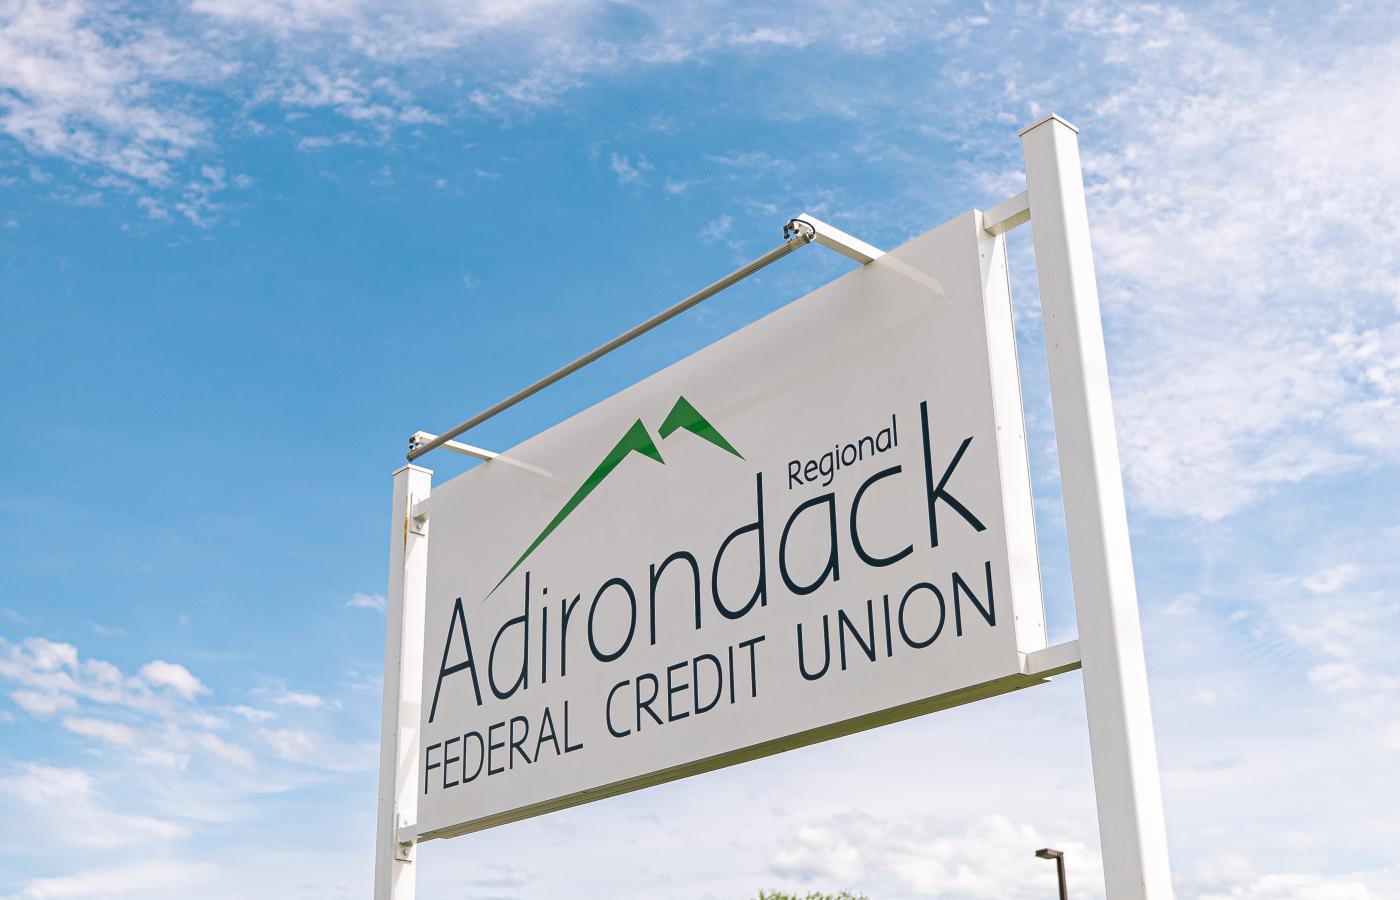 Stay up to date on Adirondack Regional Federal Credit Union news with their monthly e-newsletter.